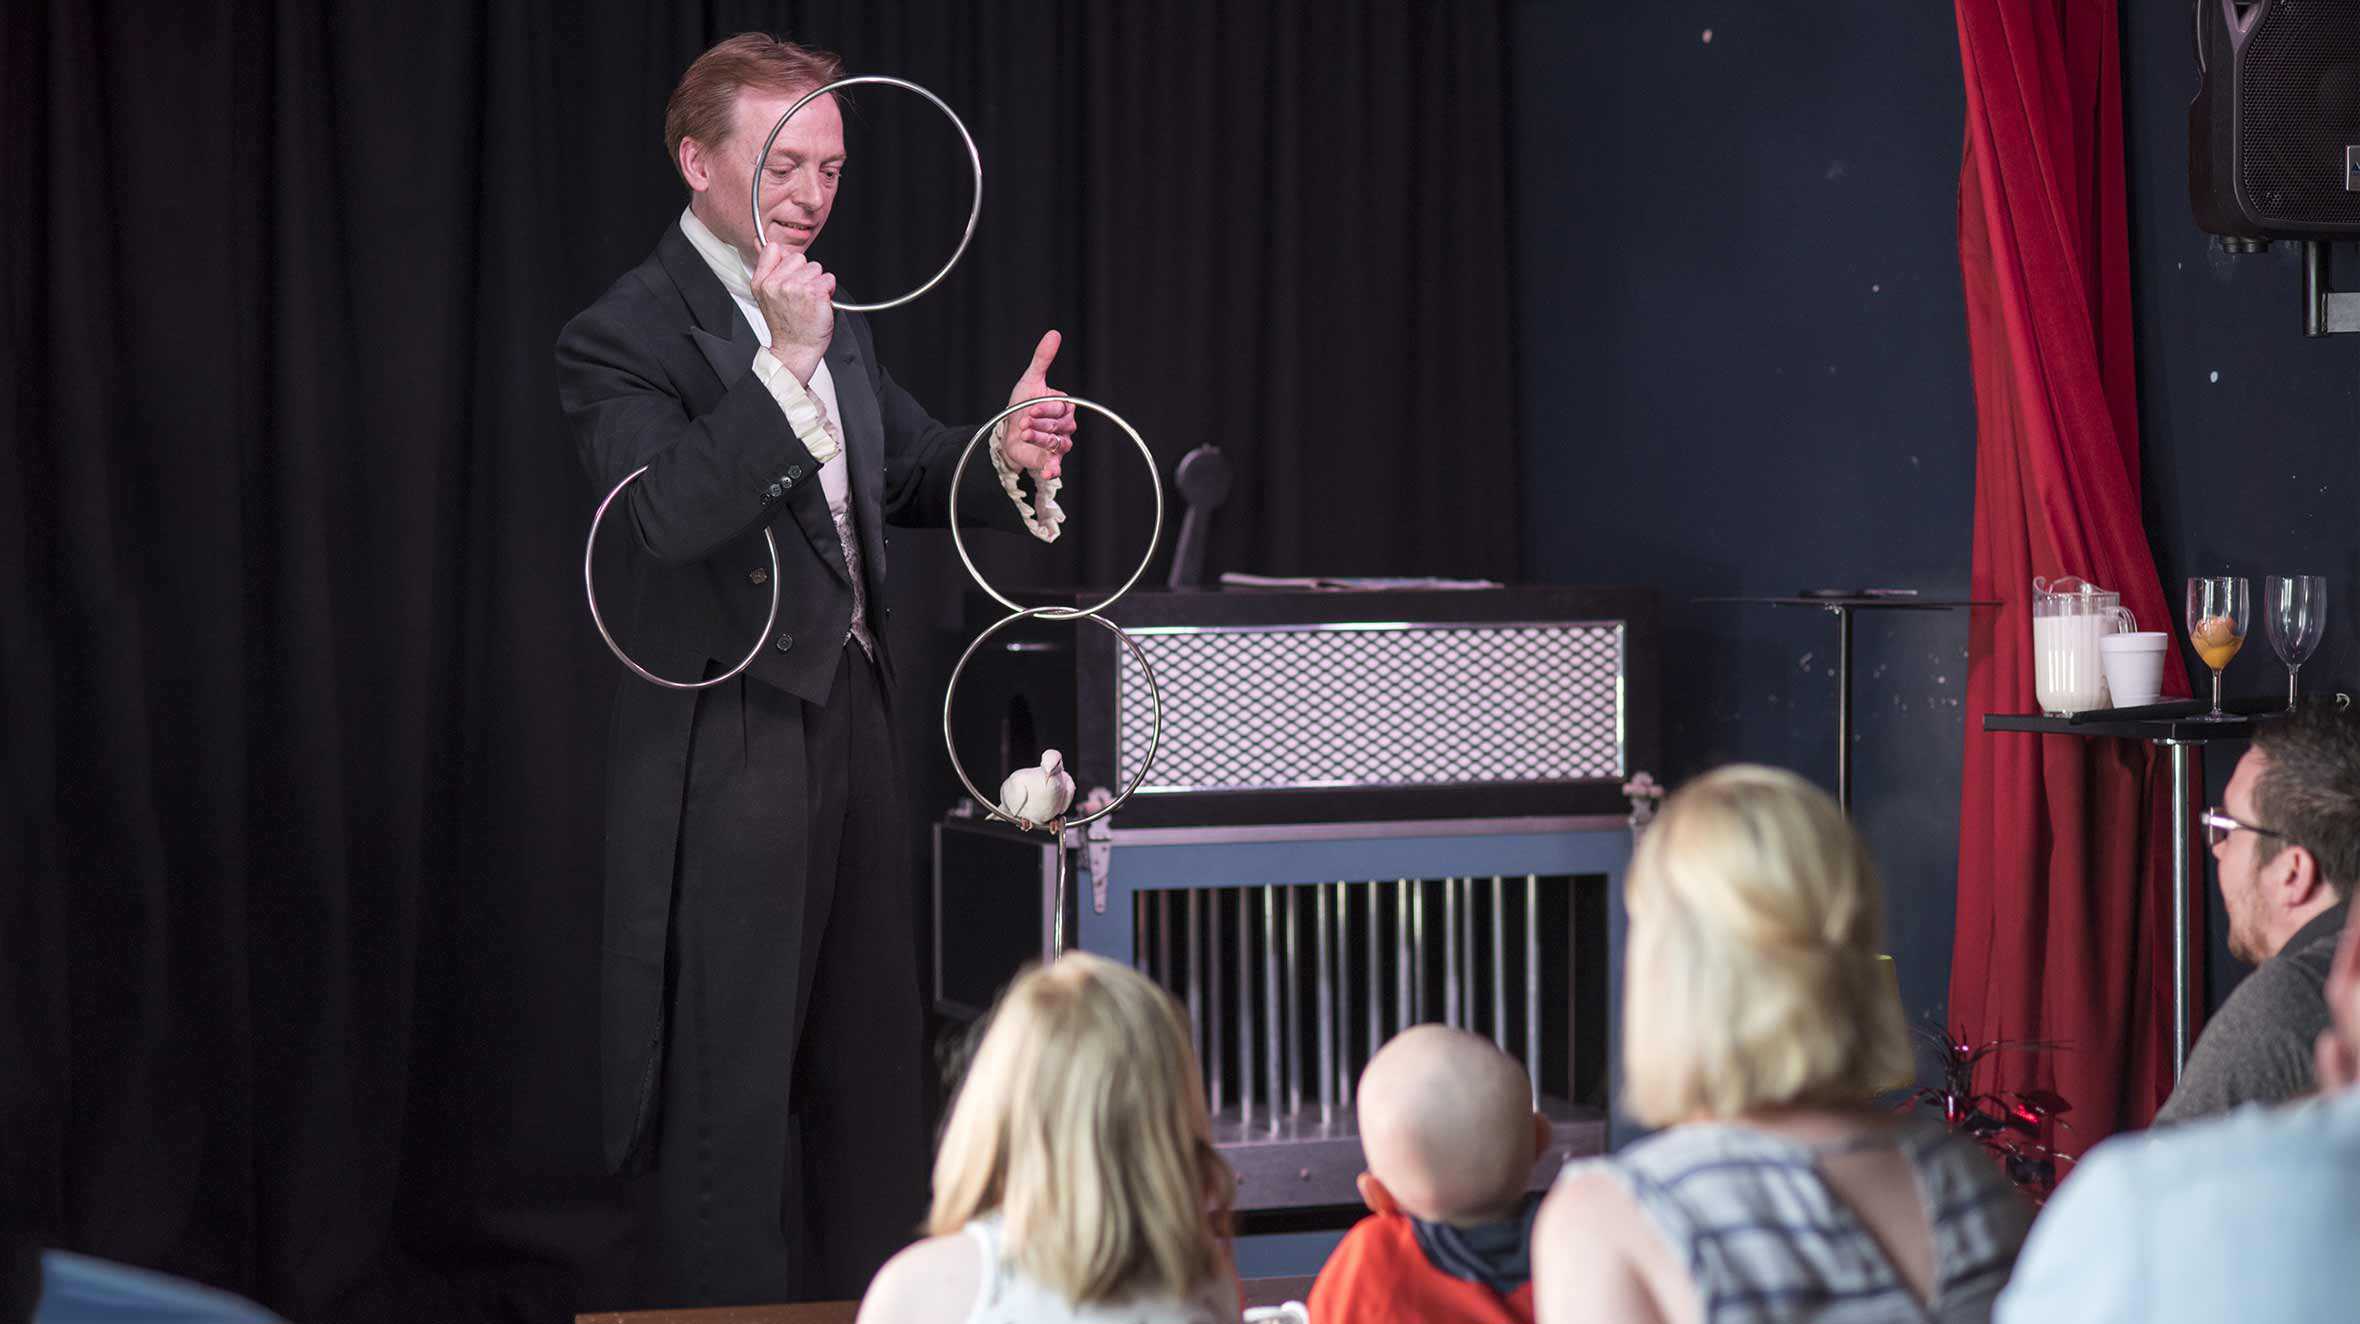 A magician performing a ring trick while Dexter watches on